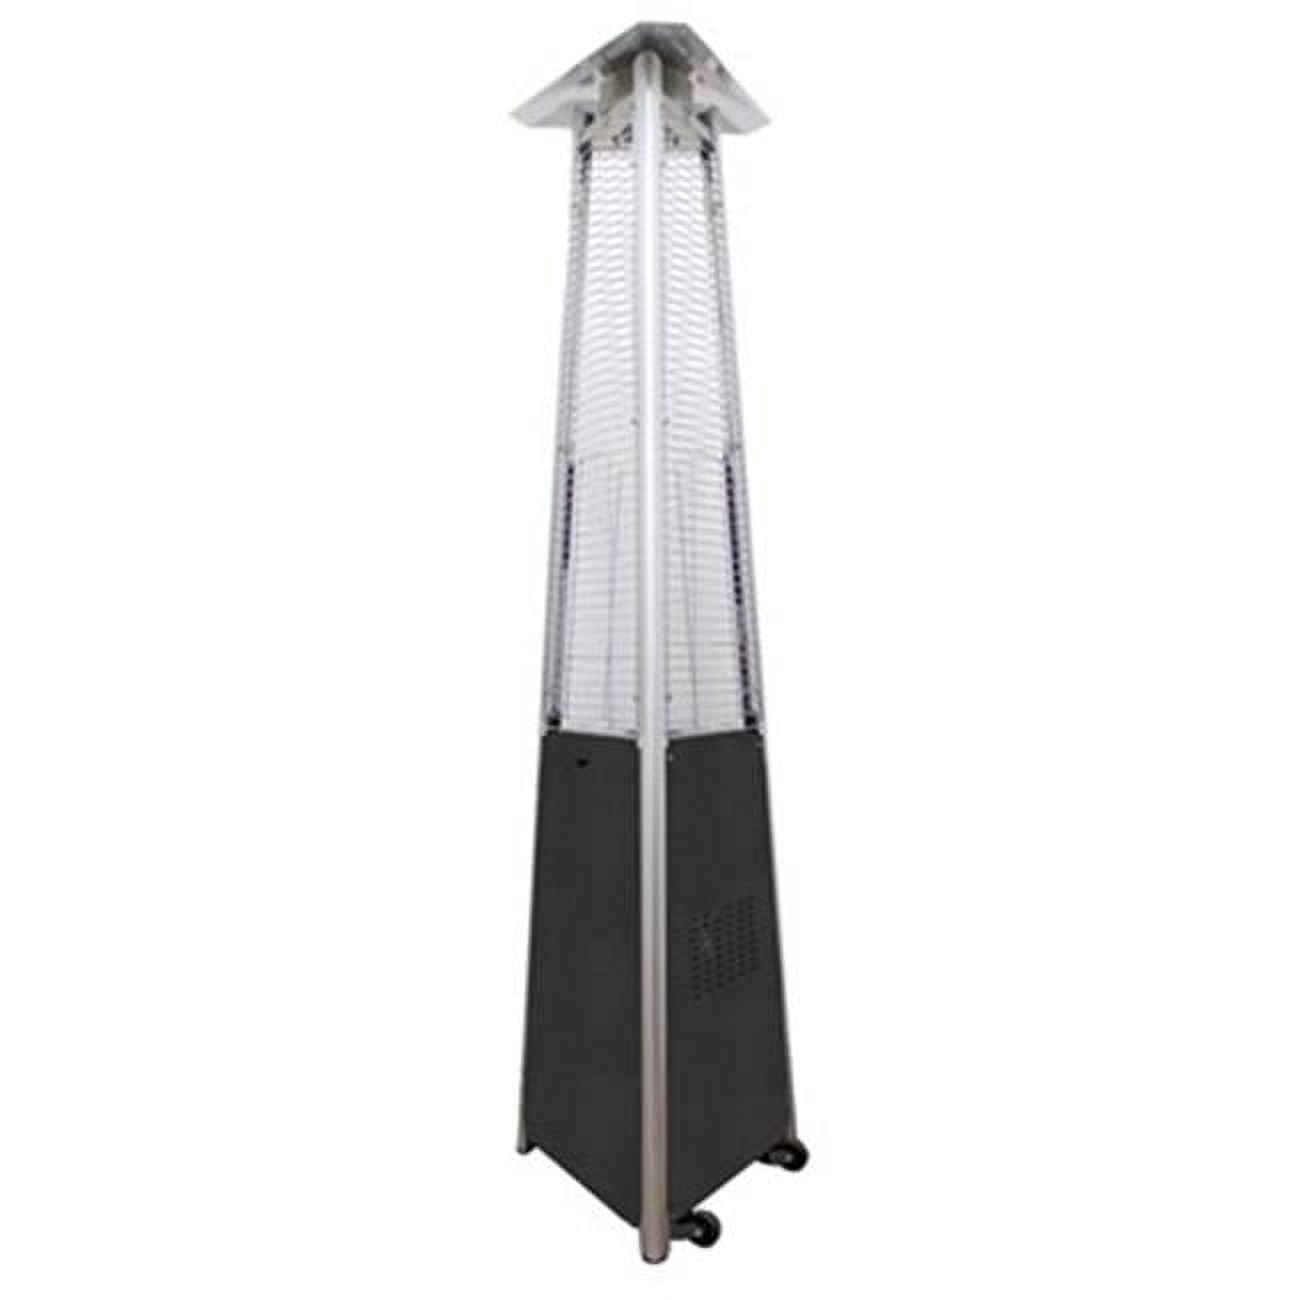 AZ Patio Heaters HLDS01-CGTCB Tall Commercial Triangle Glass Tube Heater, Hammered Silver